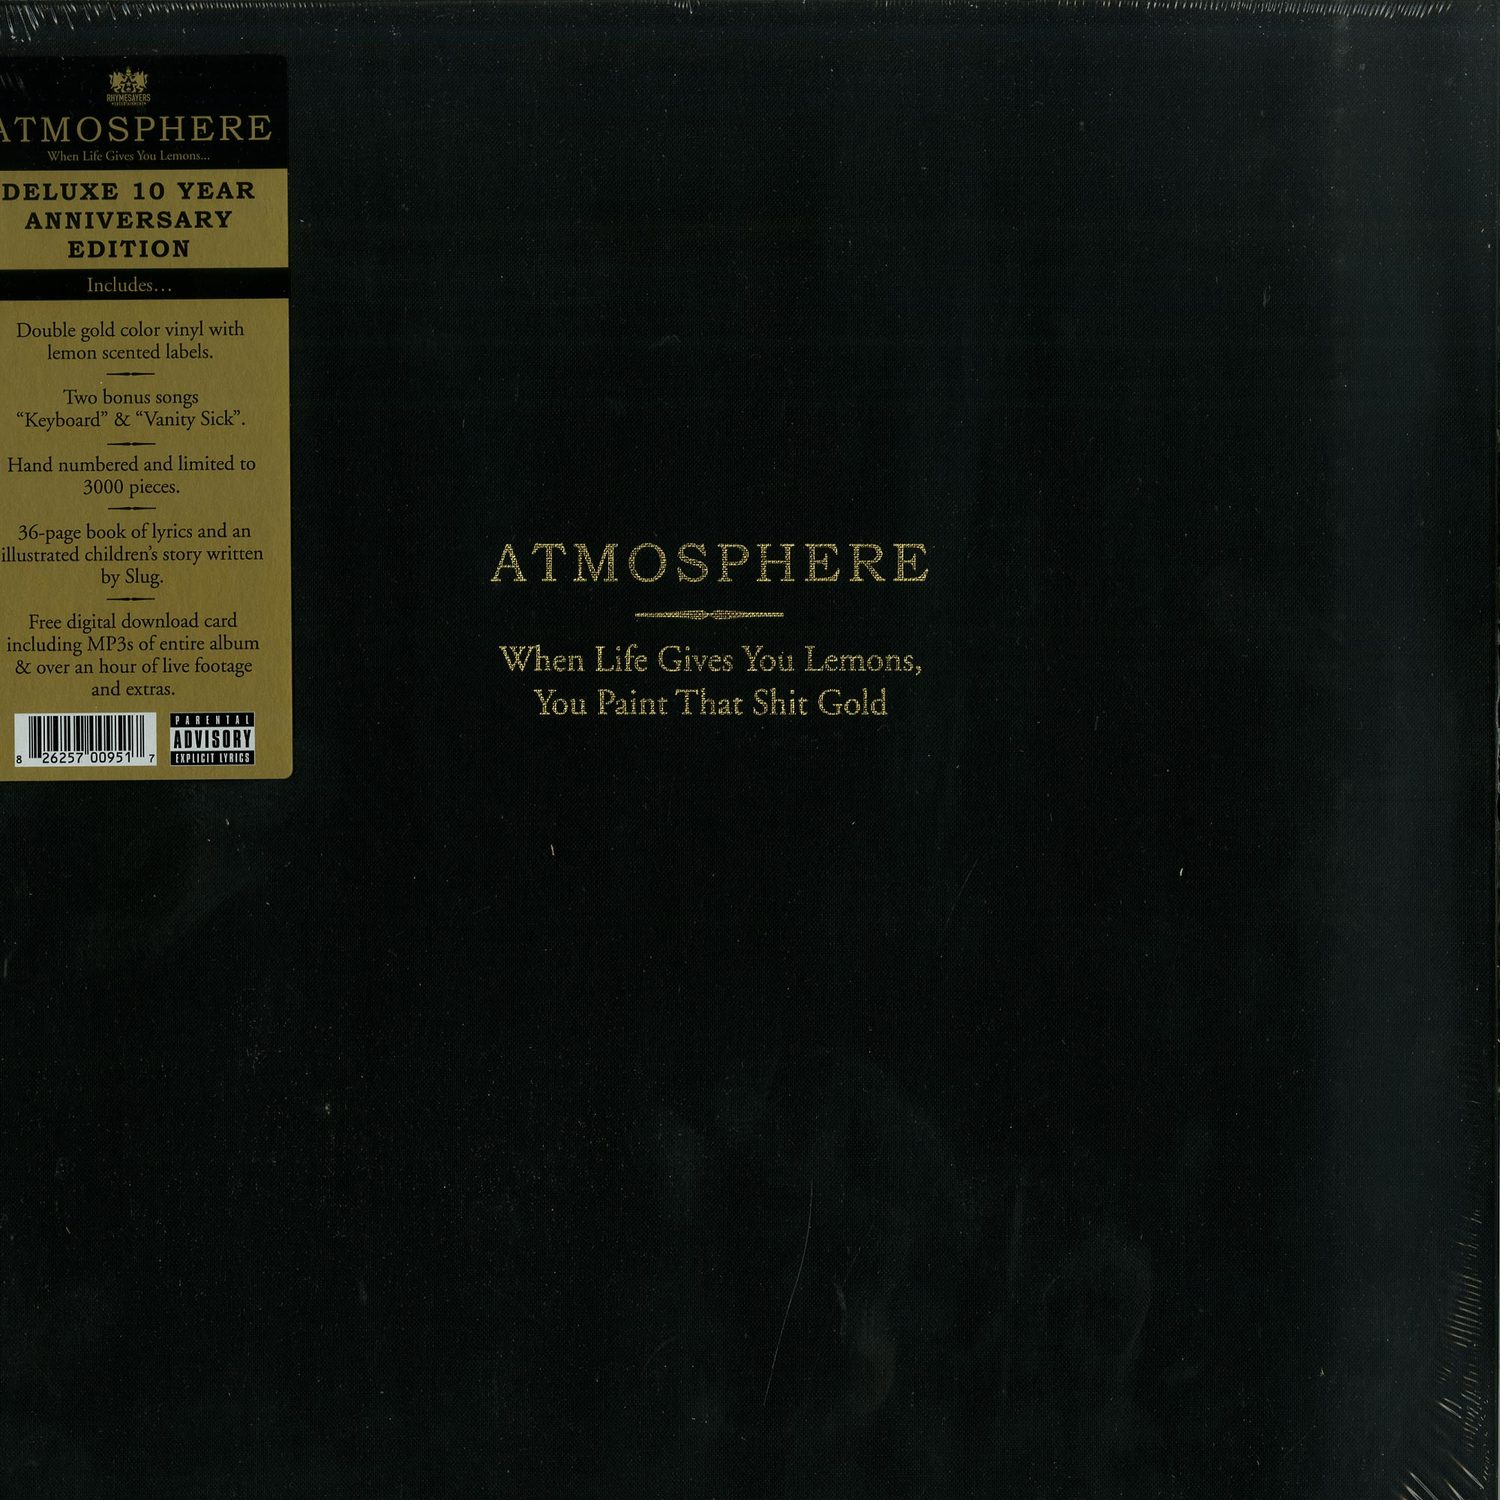 Atmosphere - WHEN LIFE GIVES YOU LEMONS, YOU PAINT THAT SHIT GOLD 